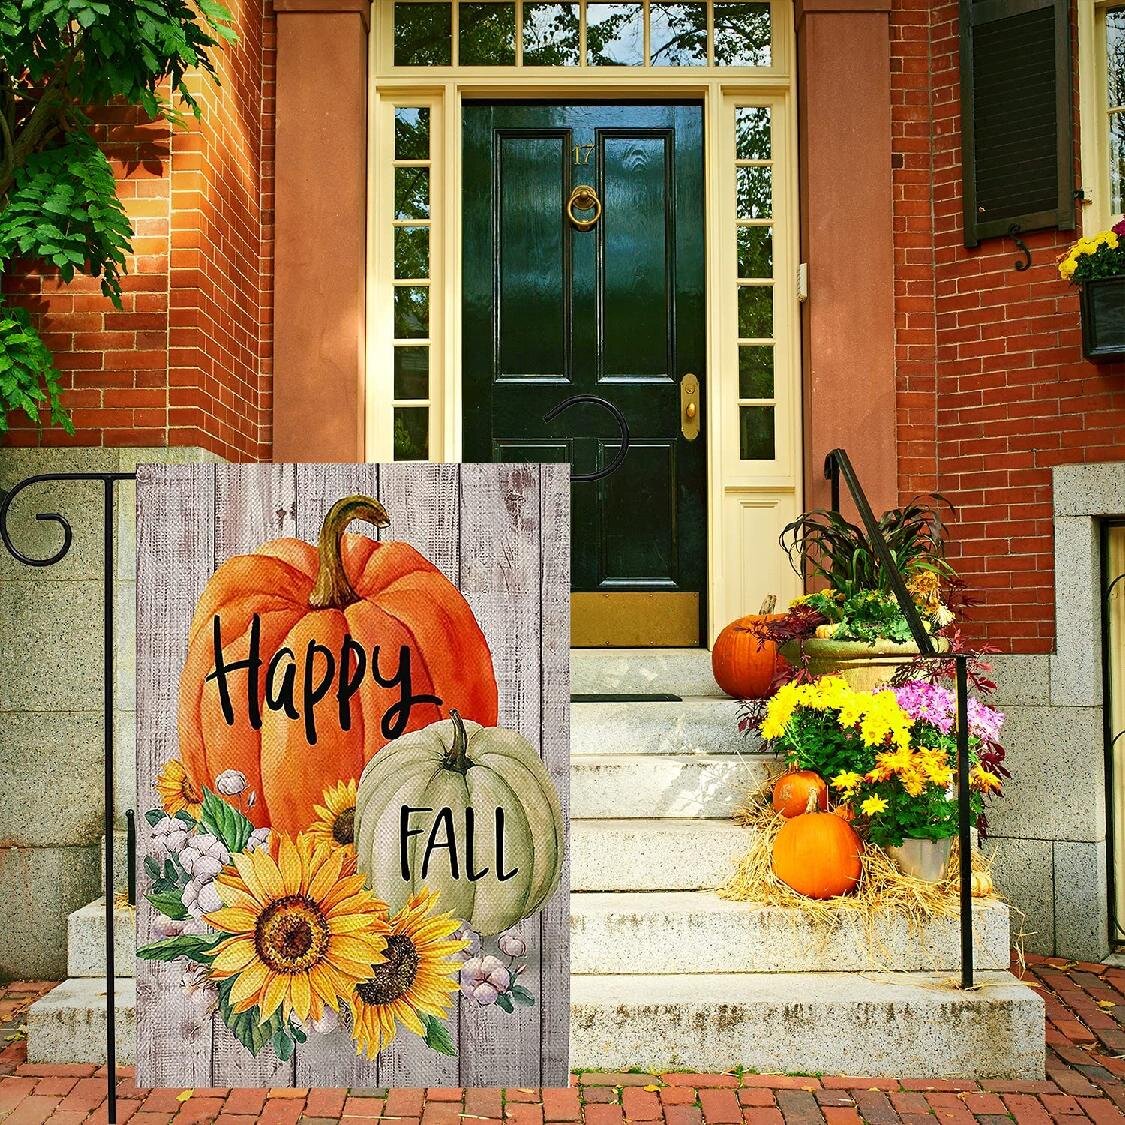 Happy Fall Garden Flag Pumpkin Sunflower Double Sided Vertical Yard Flags Outdoor Decoration 12 x 18 inch 